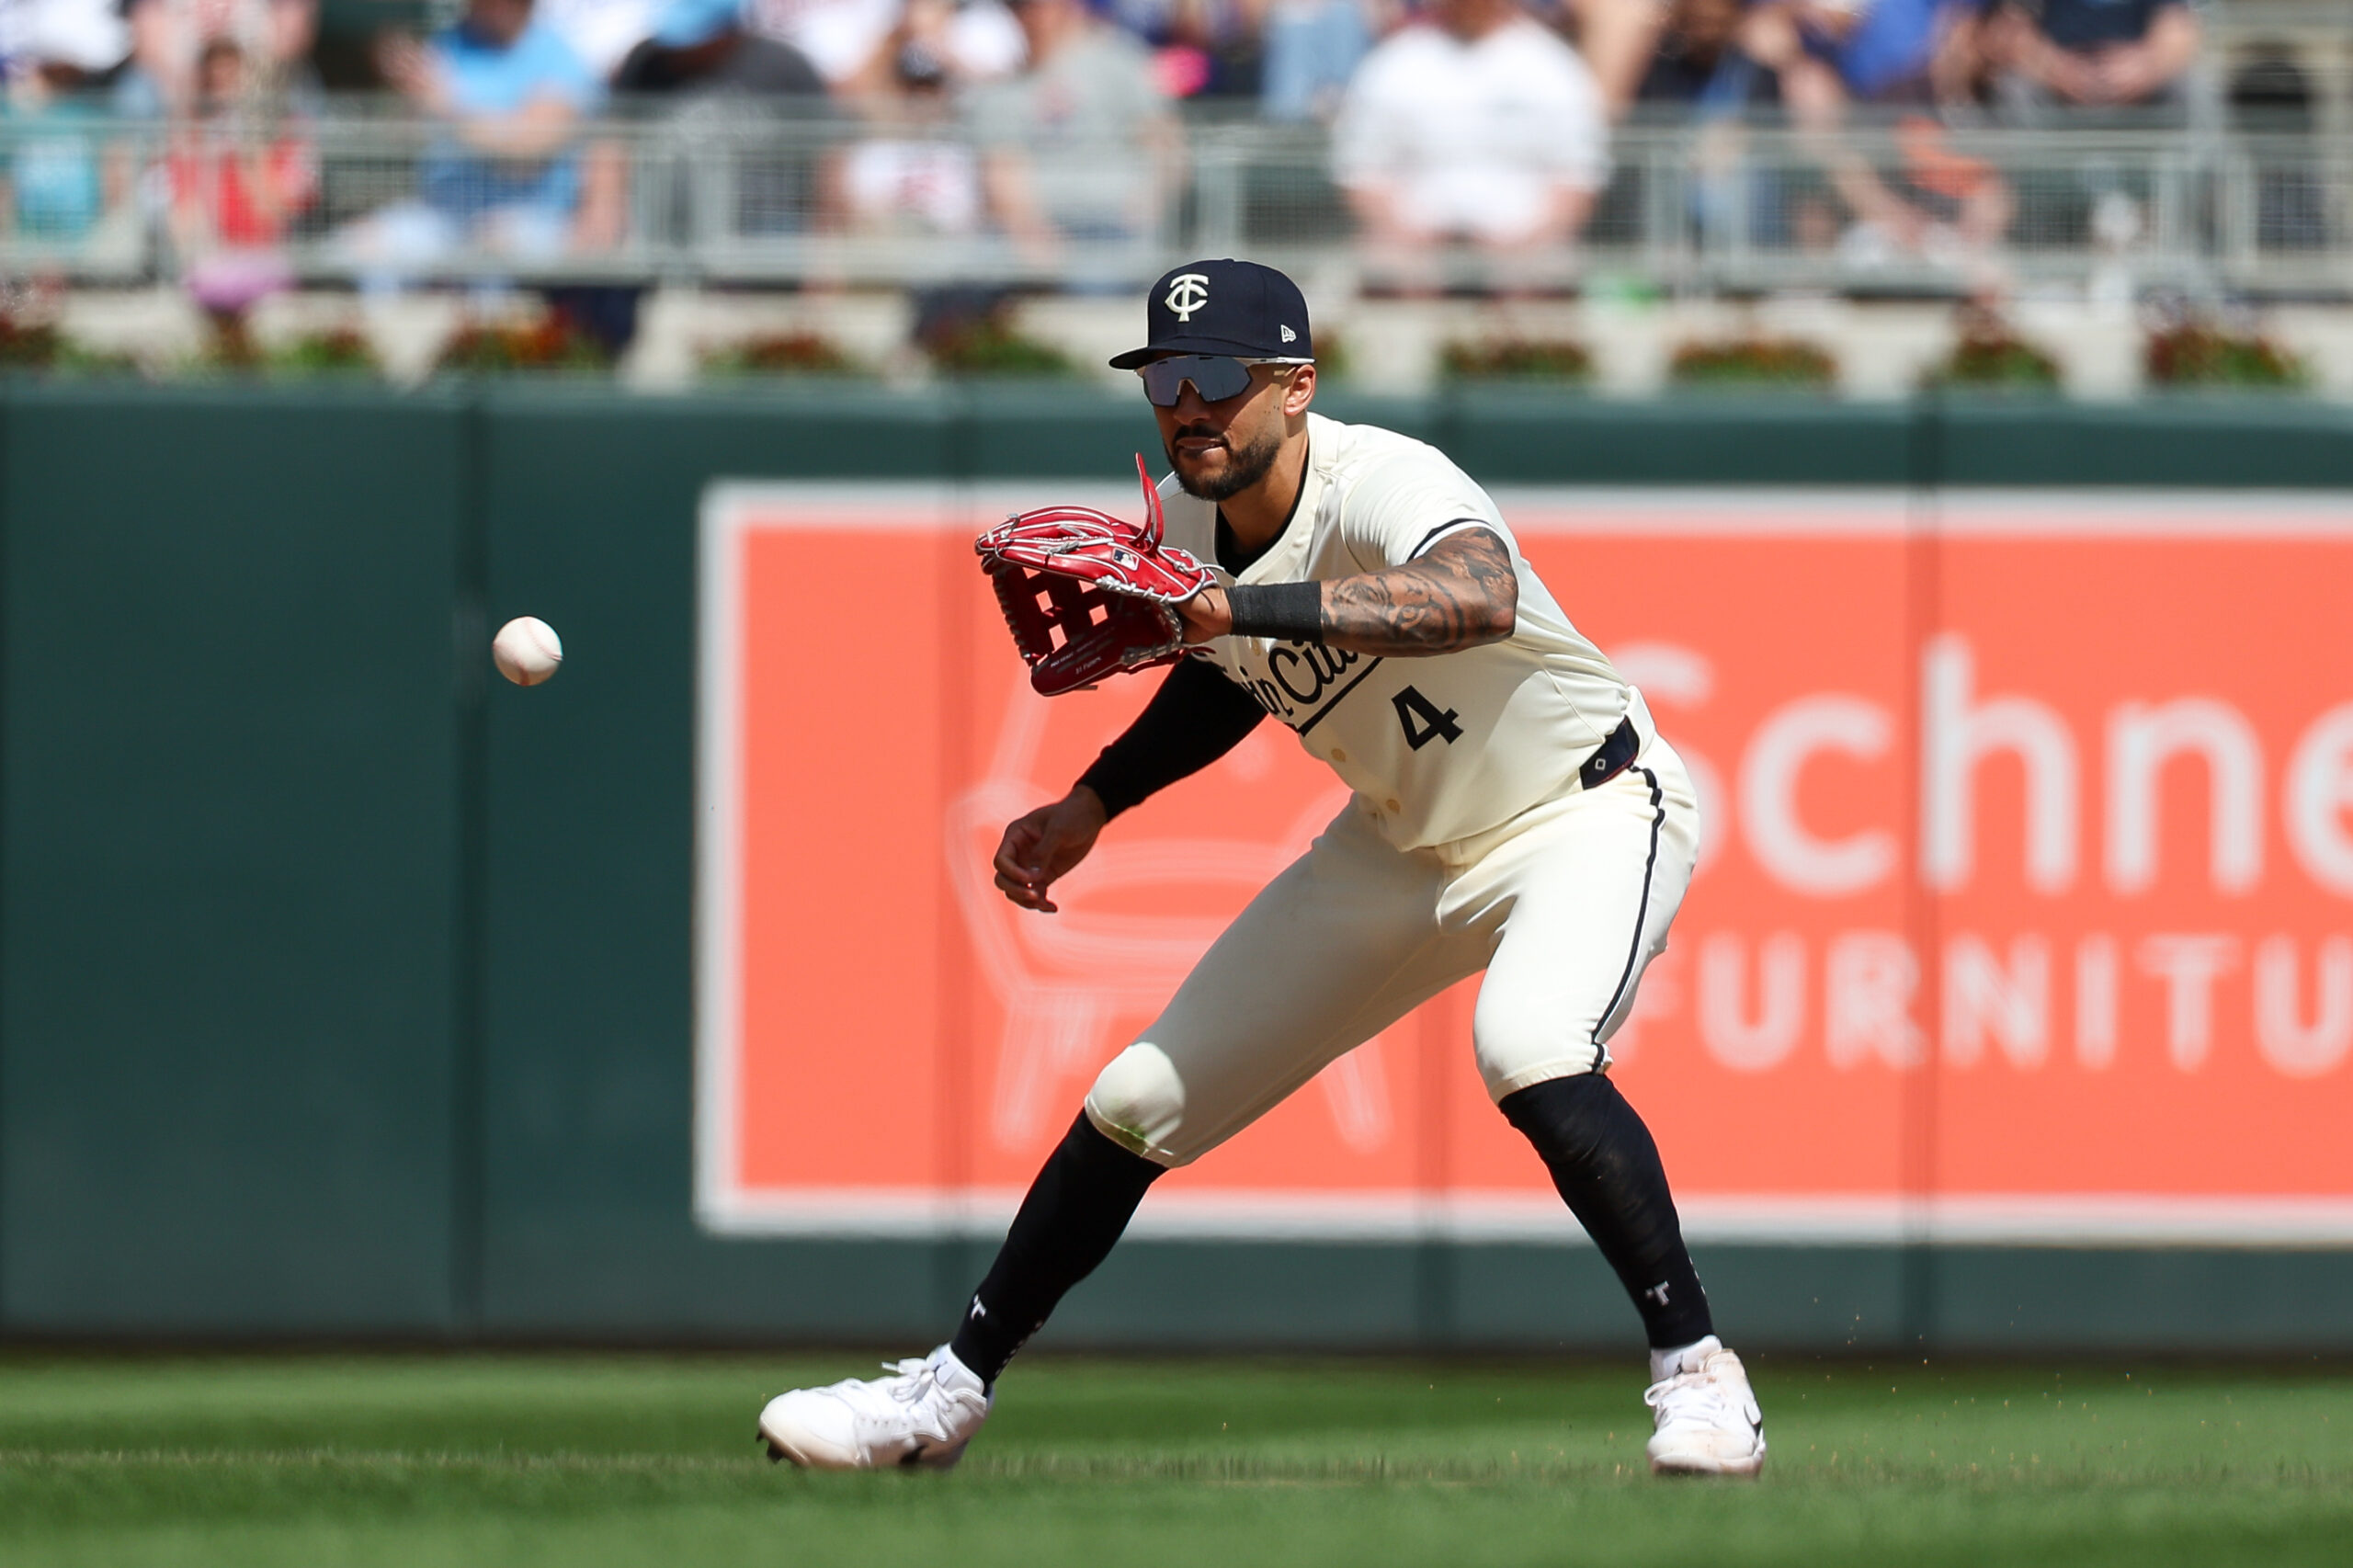 Twins to Activate Two Time All Star From the Injured List